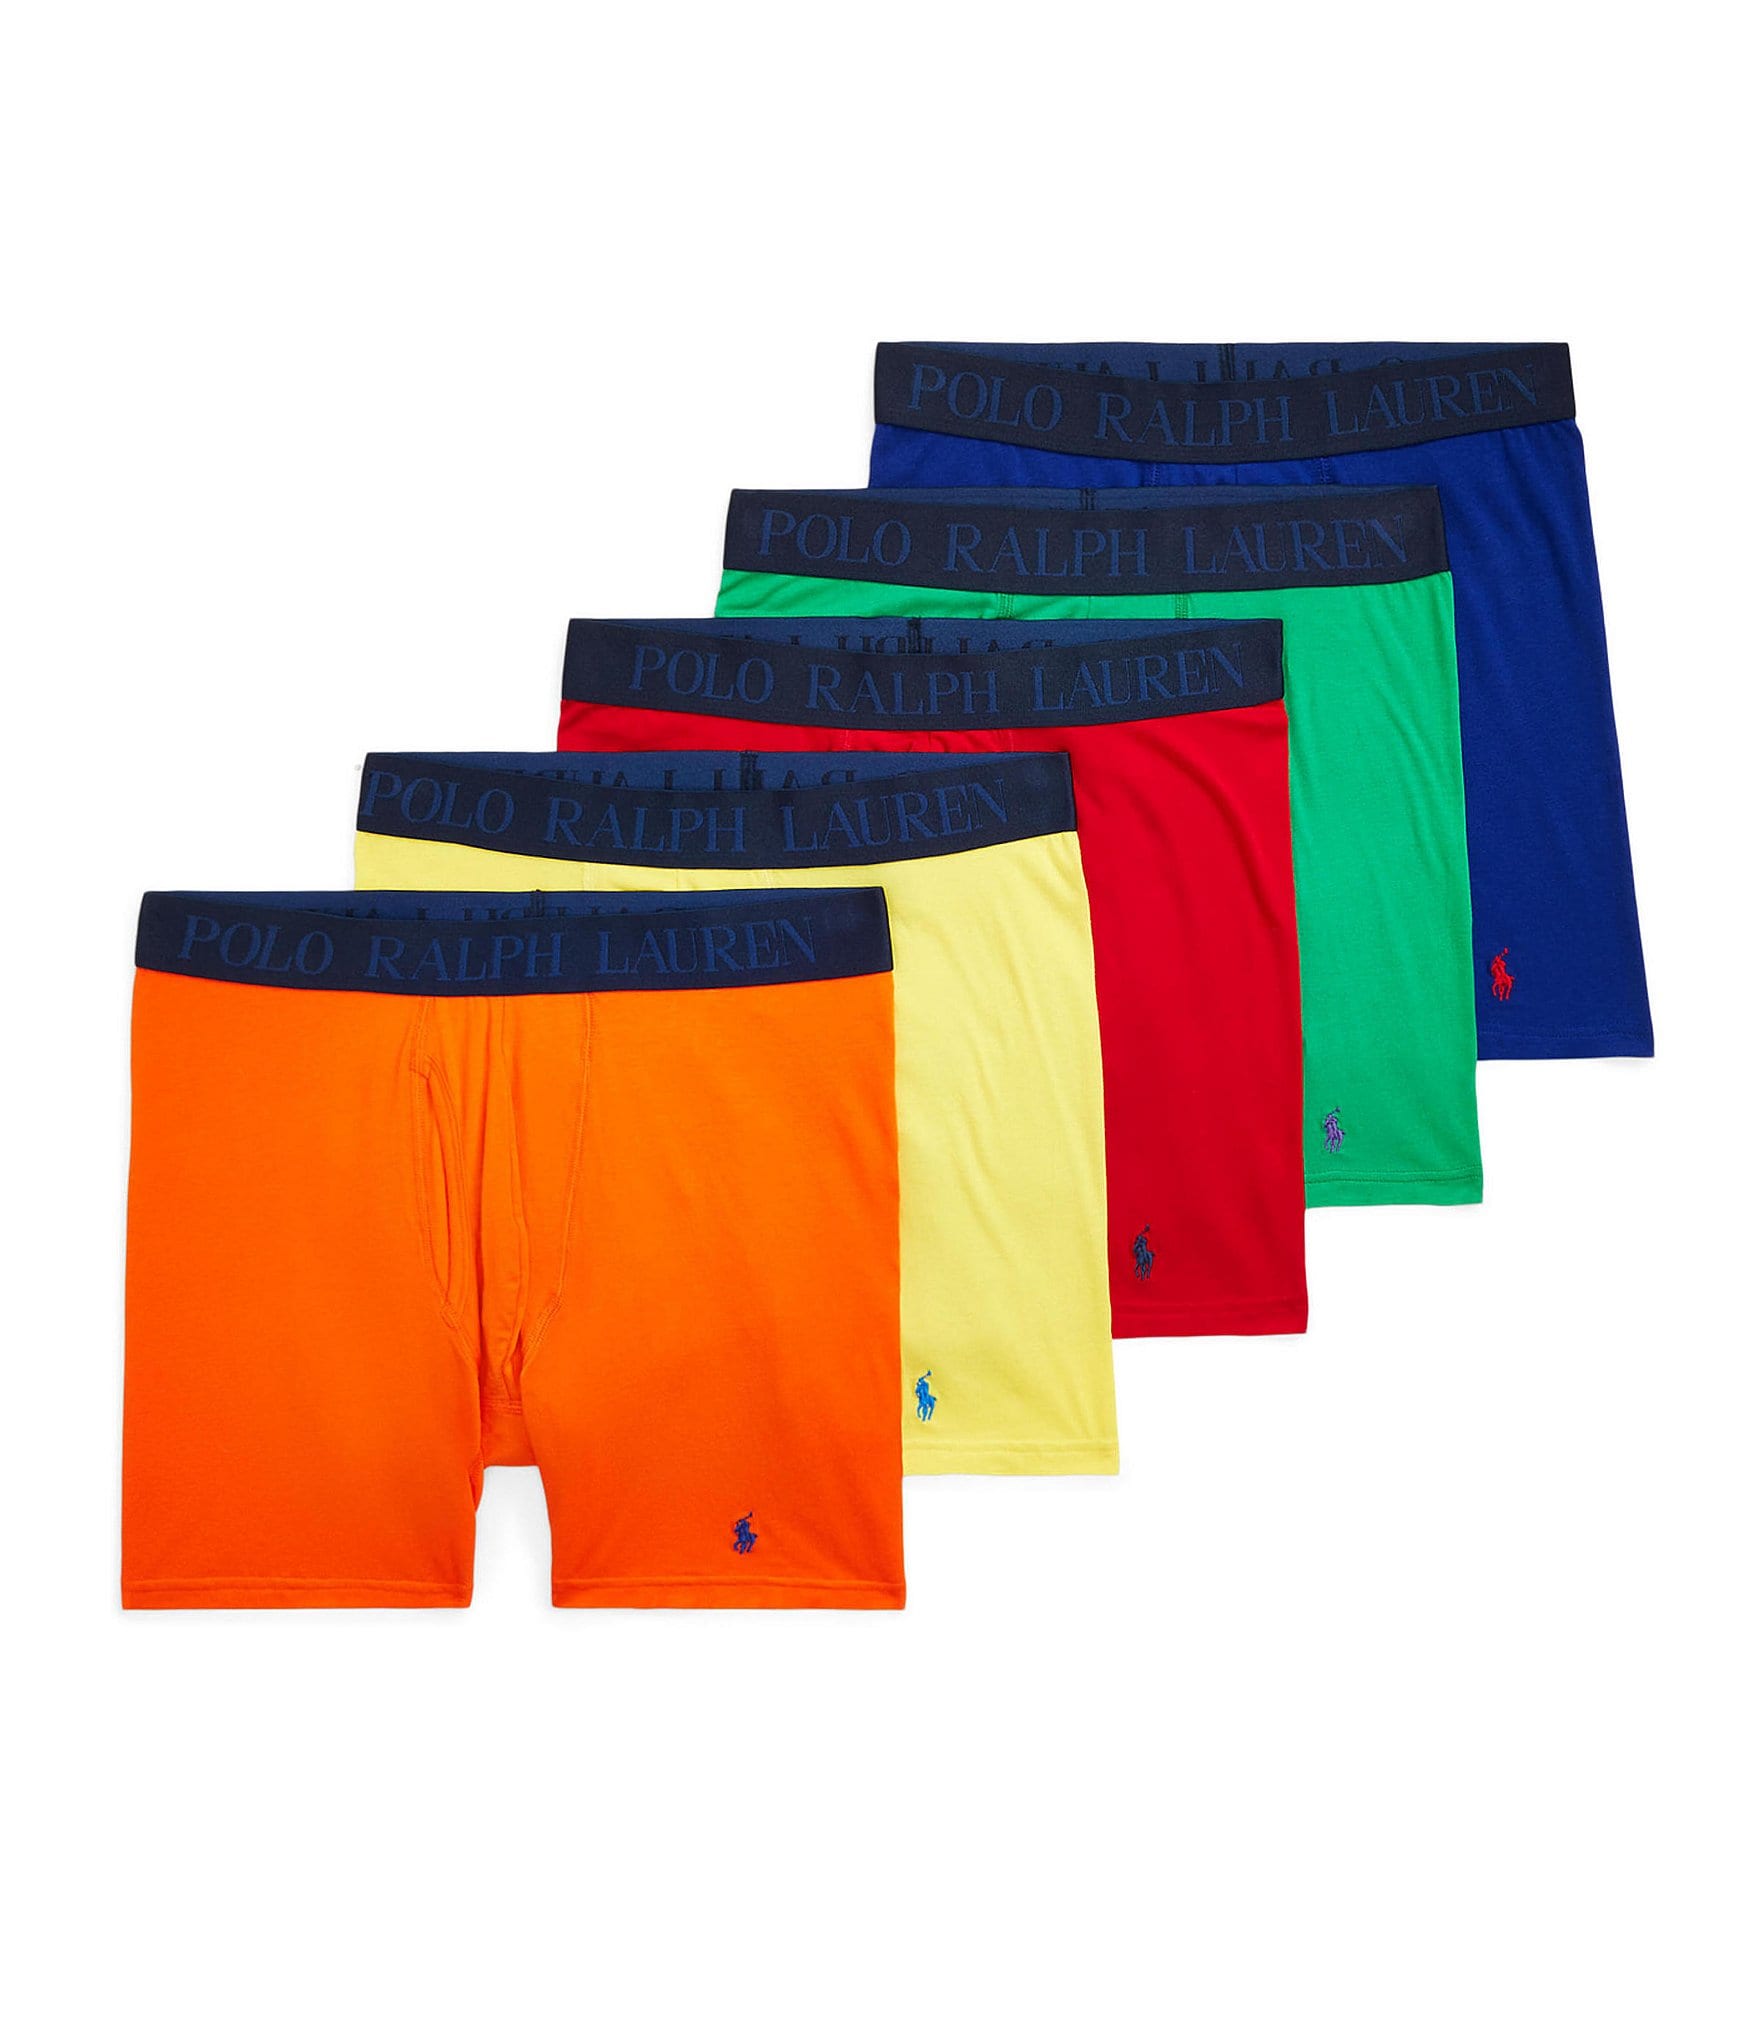 Men's Boxer Brief Assorted Colors Pack Of 5 - Intimo - Classic Polo